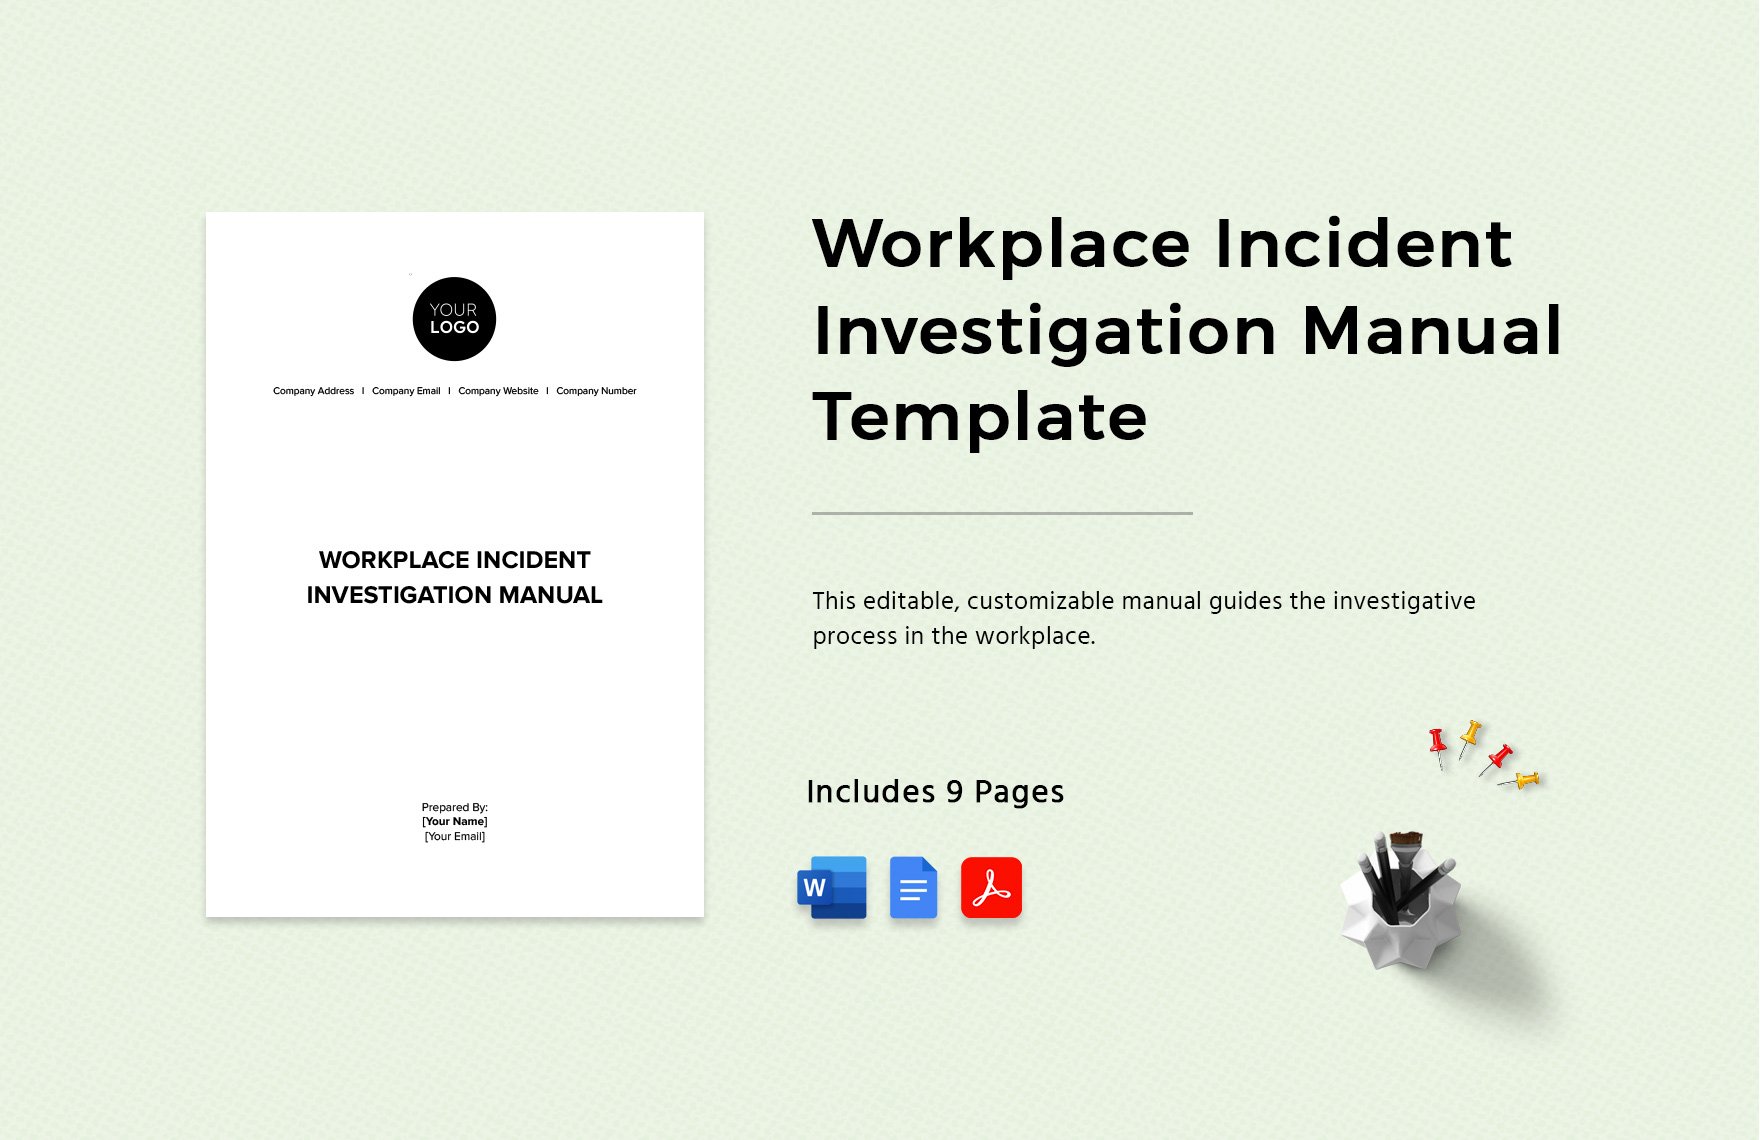 Workplace Incident Investigation Manual Template